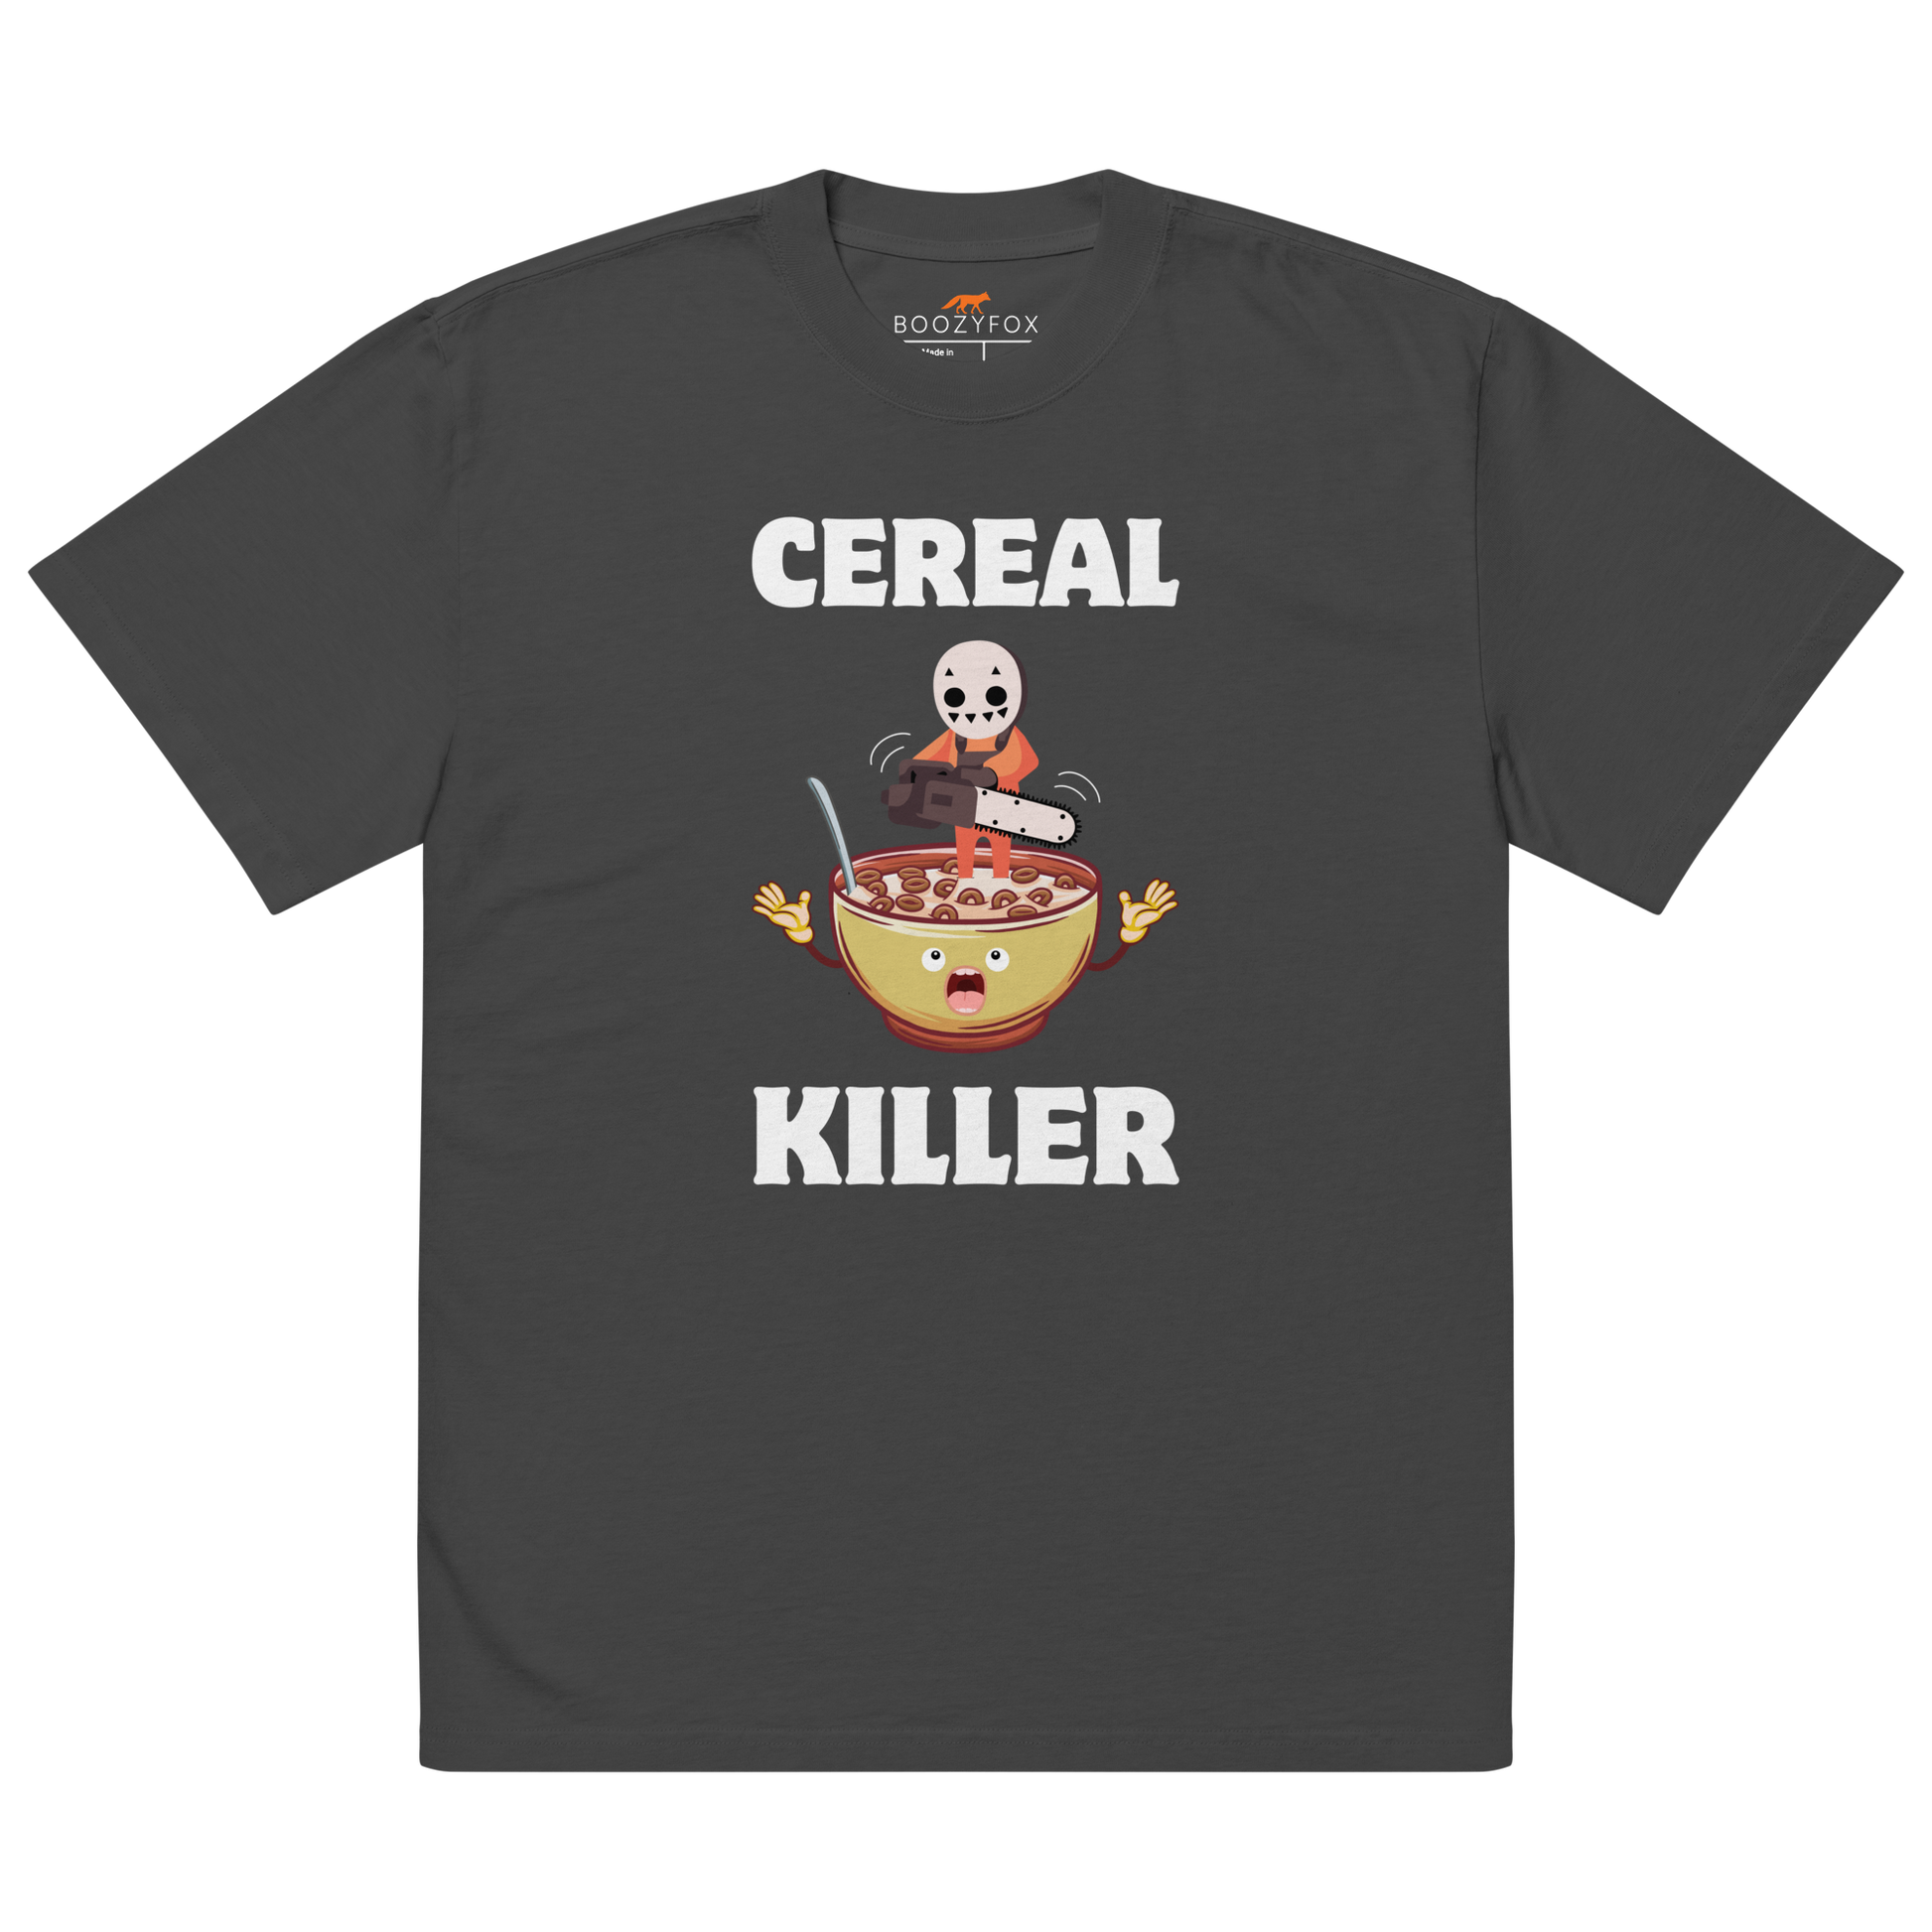 Faded Black Cereal Killer Oversized T-Shirt featuring a Cereal Killer graphic on the chest - Funny Graphic Oversized Tees - Boozy Fox